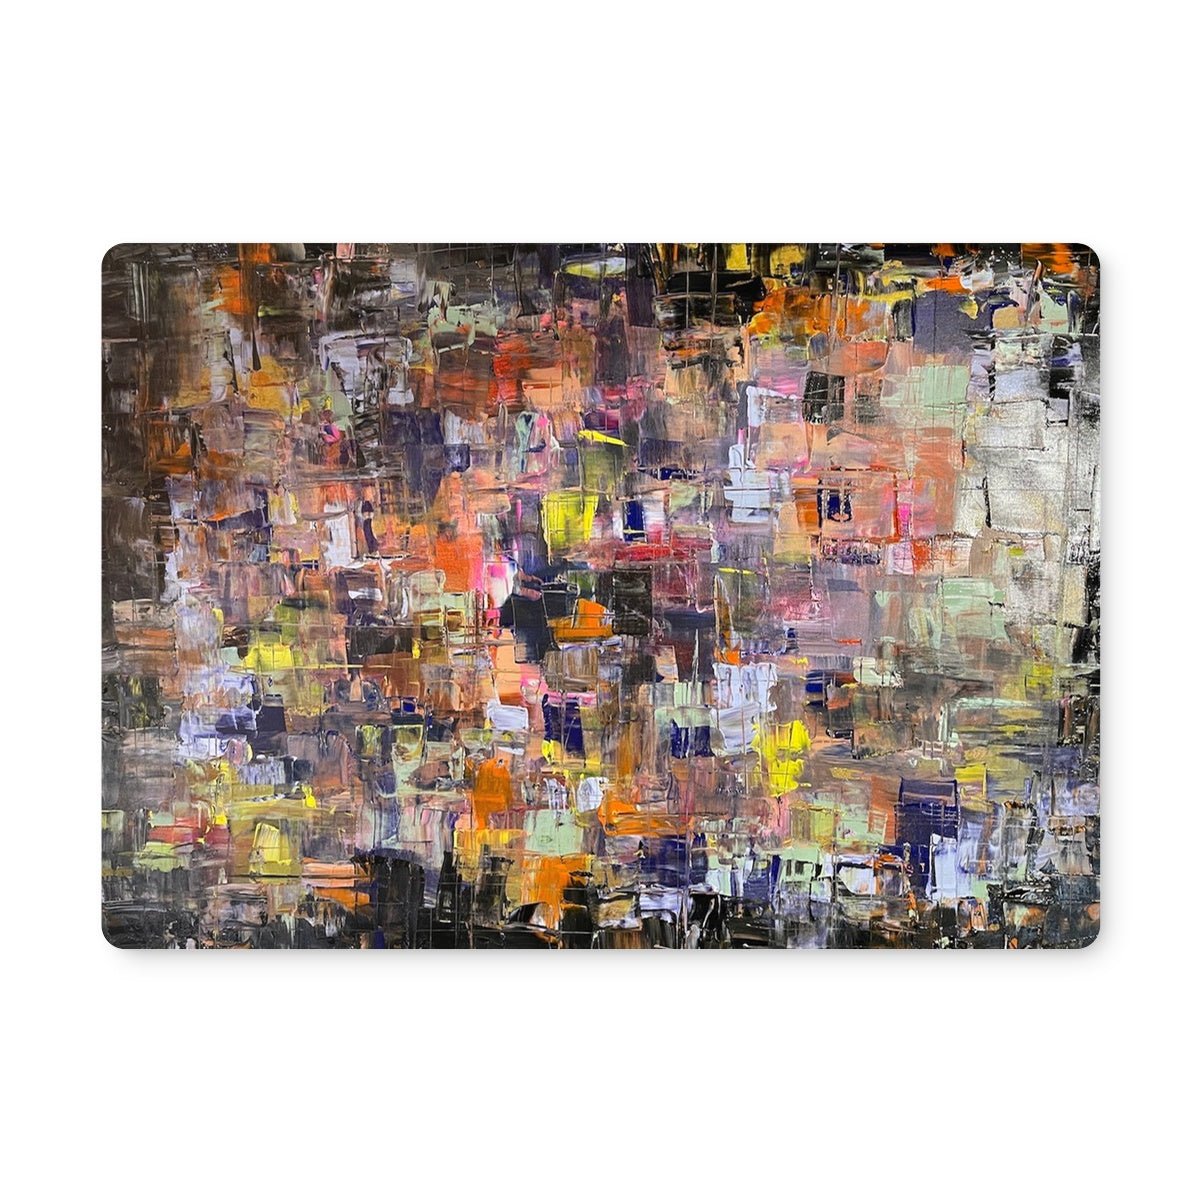 Never Enough Art Gifts Placemat-Placemats-Abstract & Impressionistic Art Gallery-Single Placemat-Paintings, Prints, Homeware, Art Gifts From Scotland By Scottish Artist Kevin Hunter